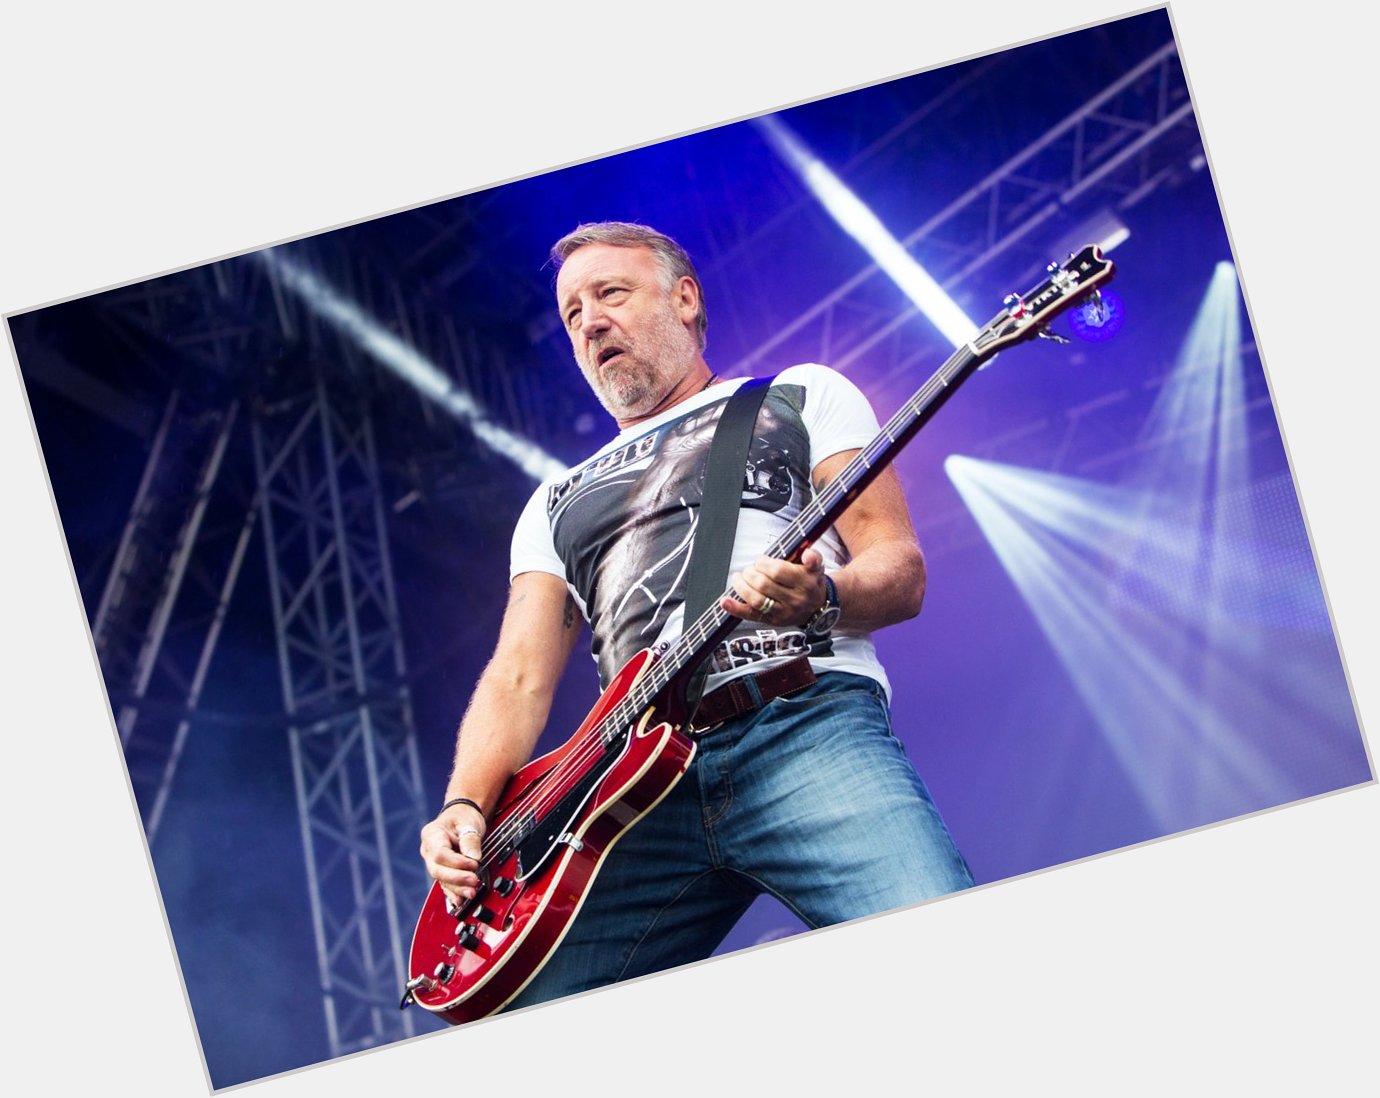 Happy 67th Birthday to Peter Hook. The only person ever to pay me in cash for a session. Legend!
IX 